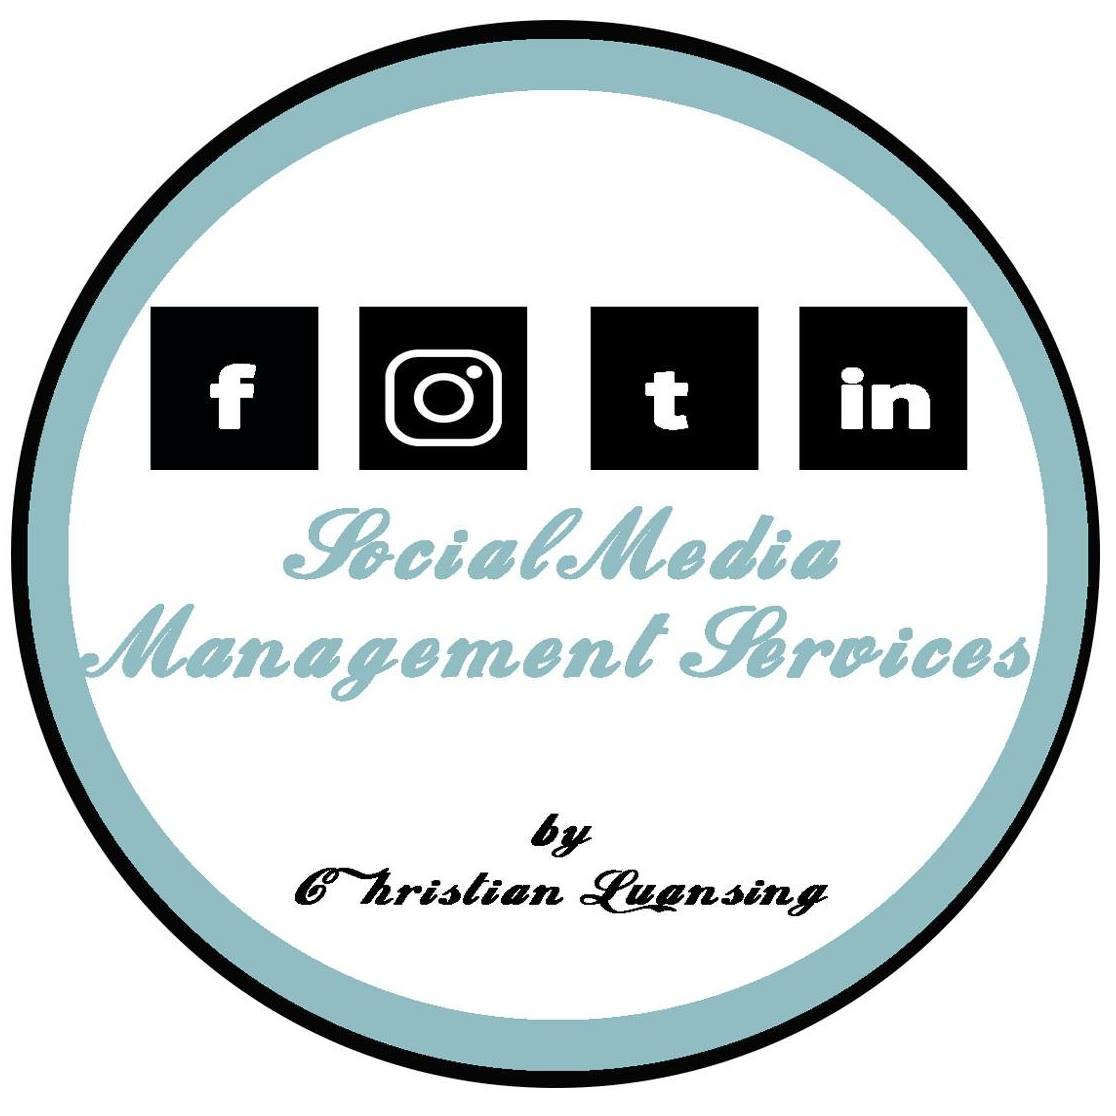 Social Media Management Services by Christian Luansing